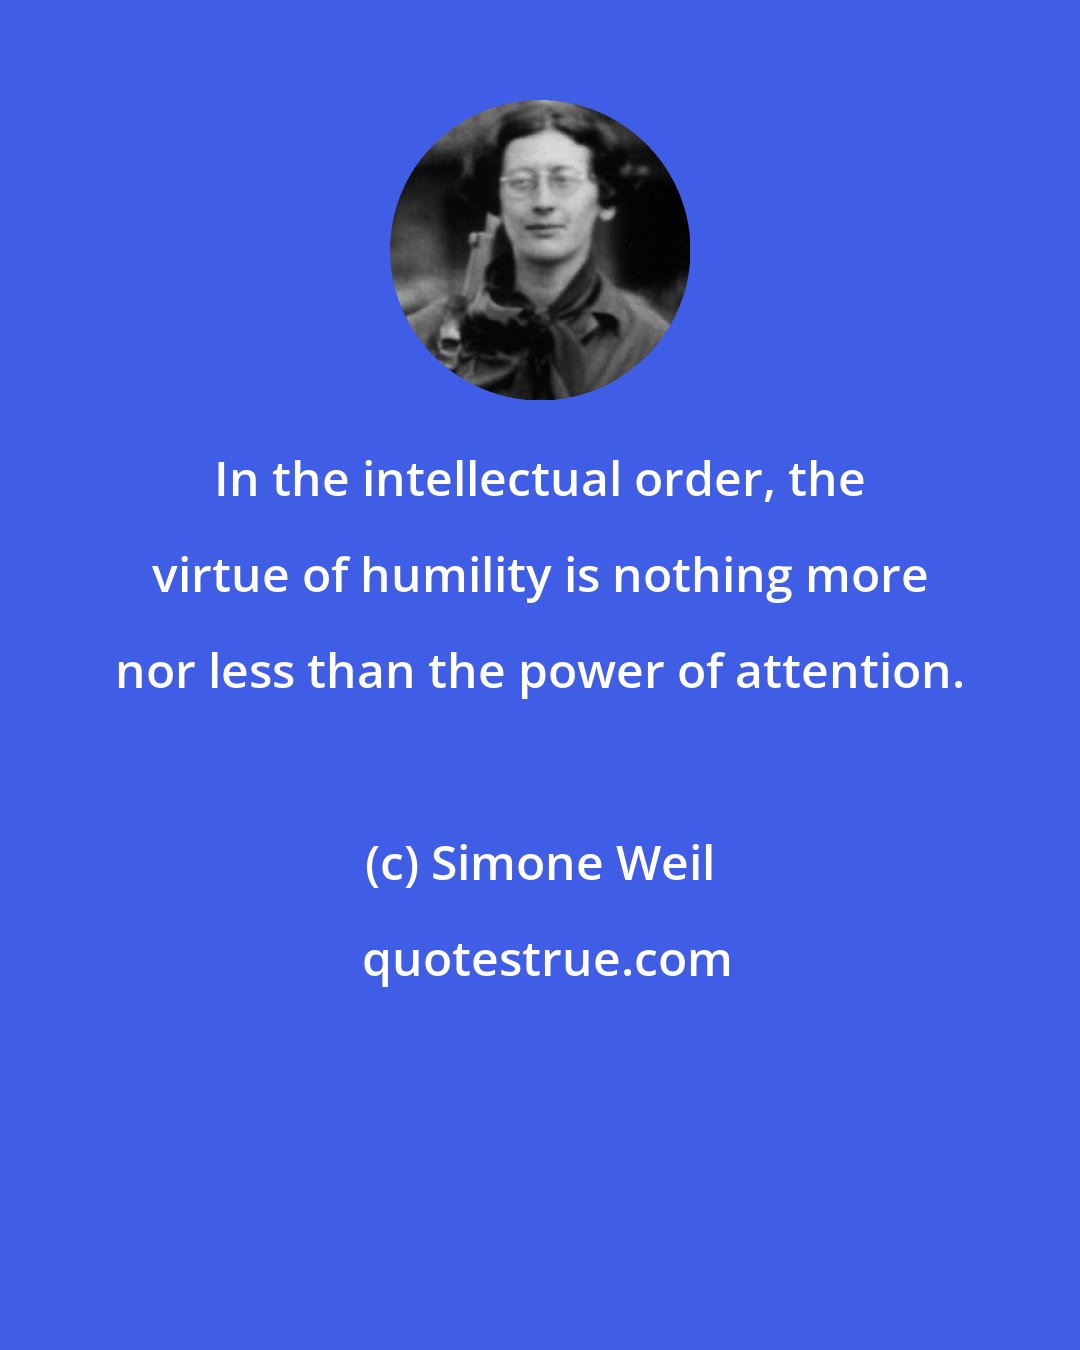 Simone Weil: In the intellectual order, the virtue of humility is nothing more nor less than the power of attention.